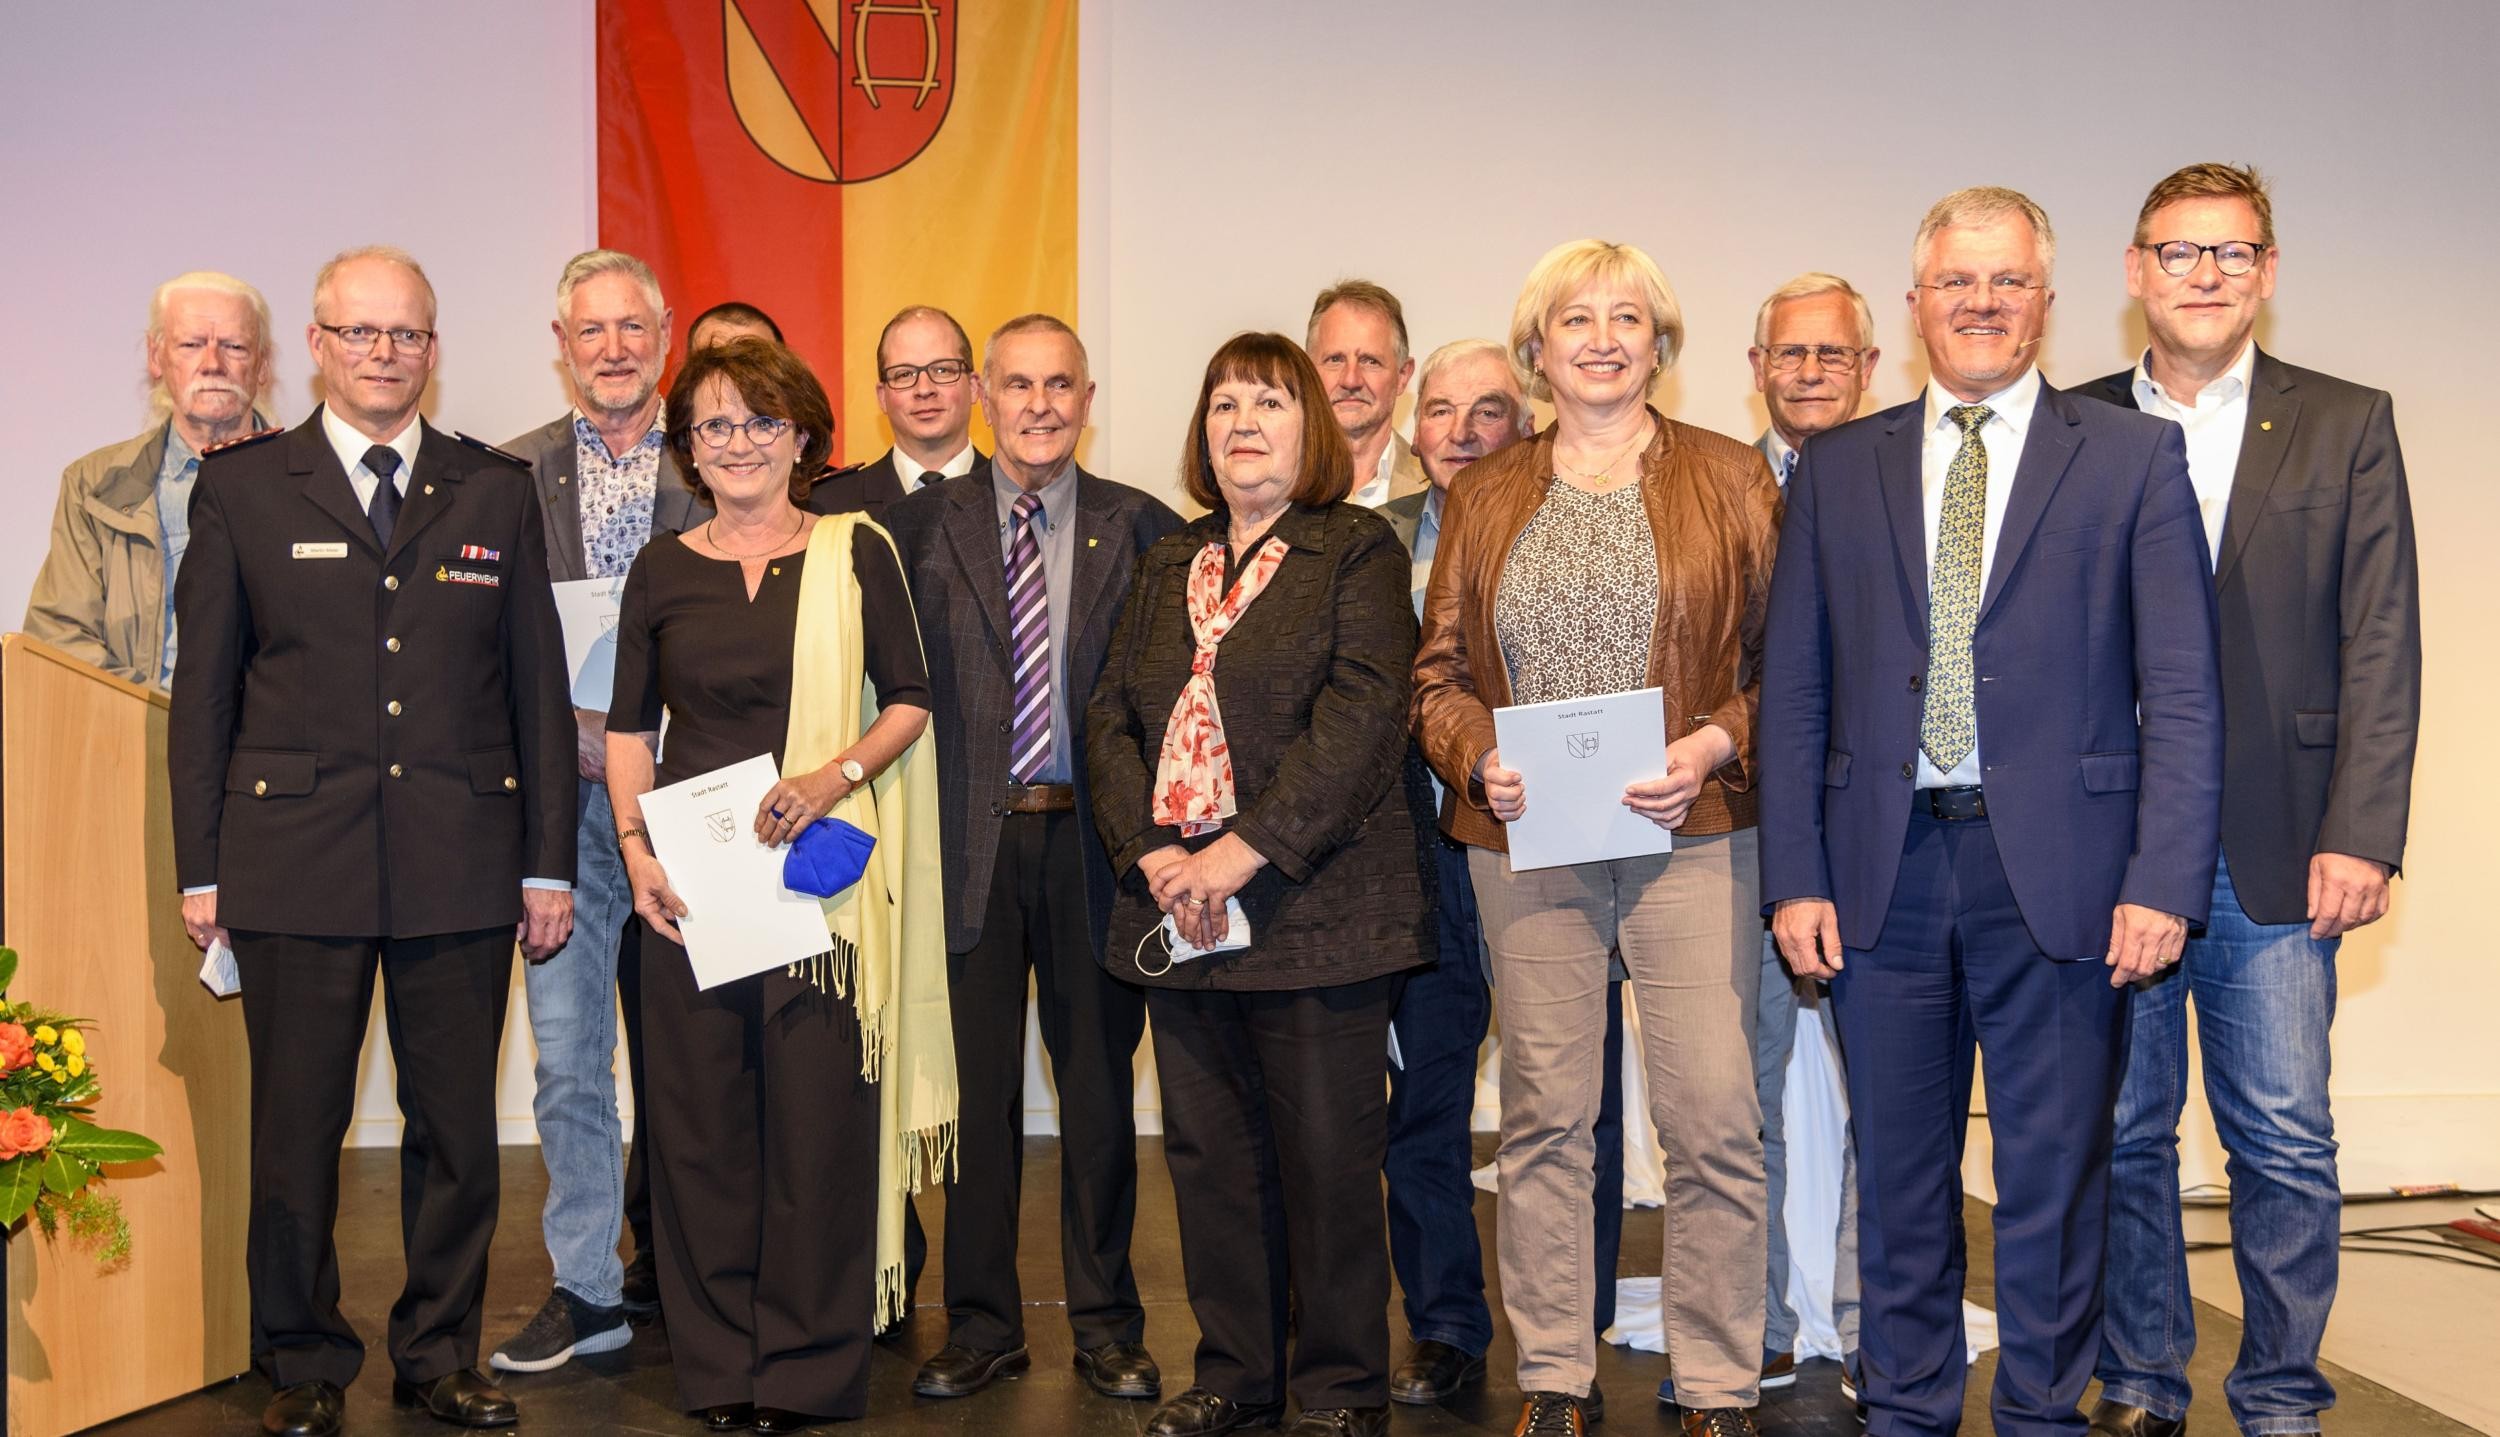 People on stage at the citizens' reception of the city of Rastatt